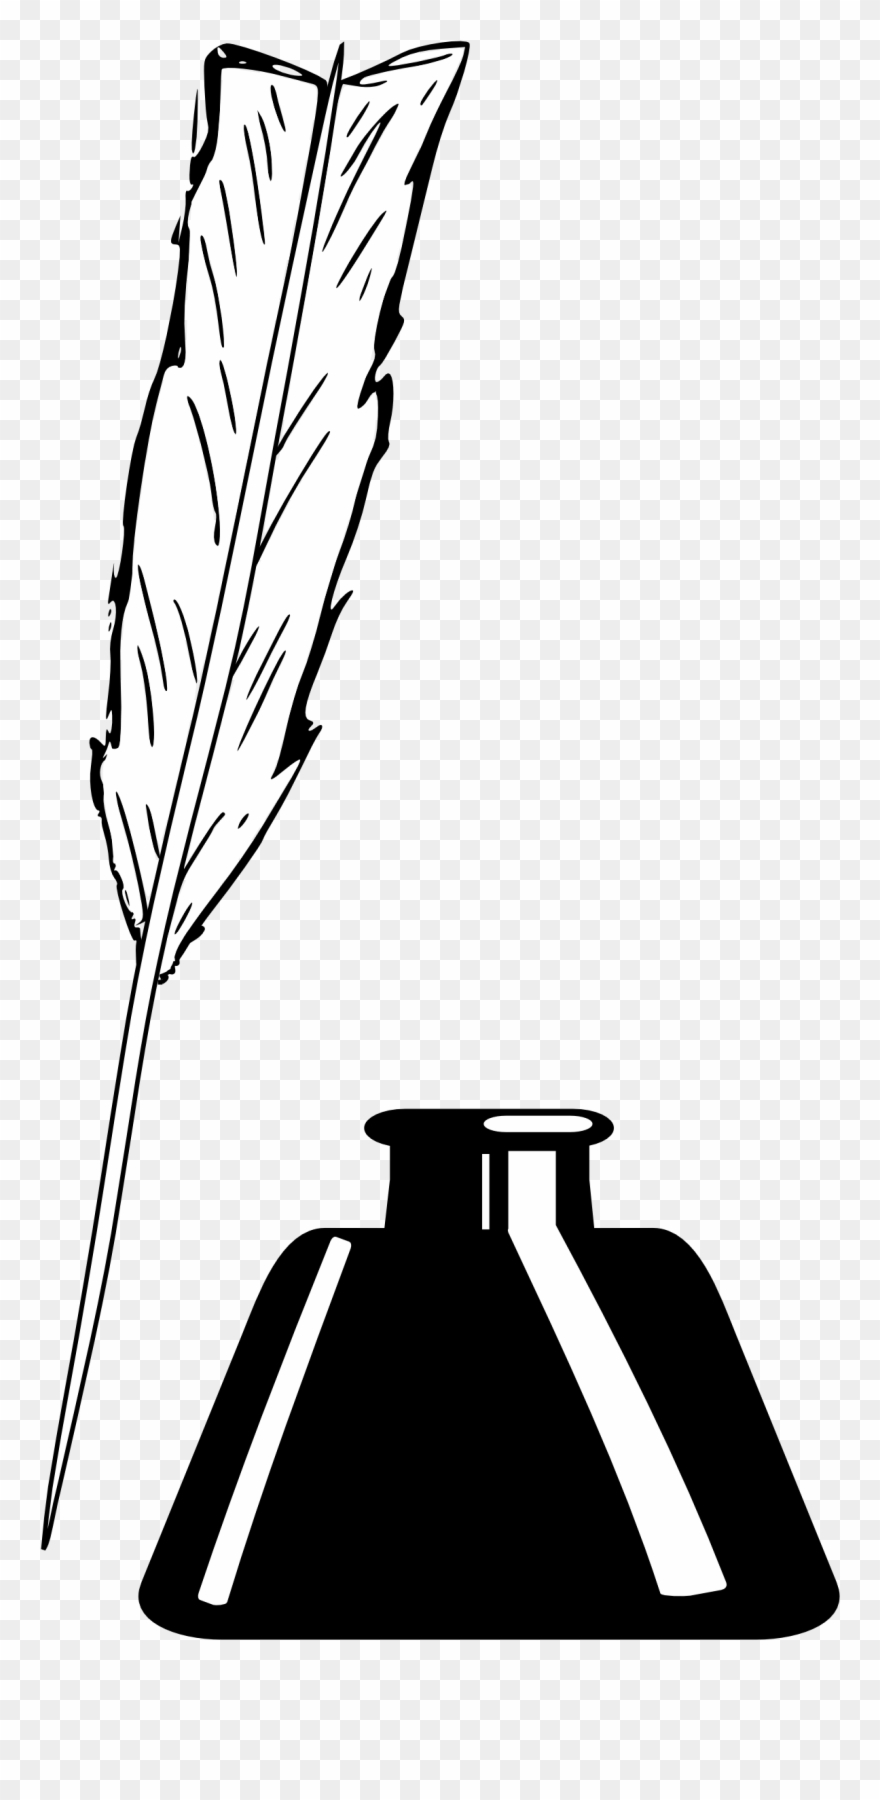 Pen And Inkwell Quill Clip Art